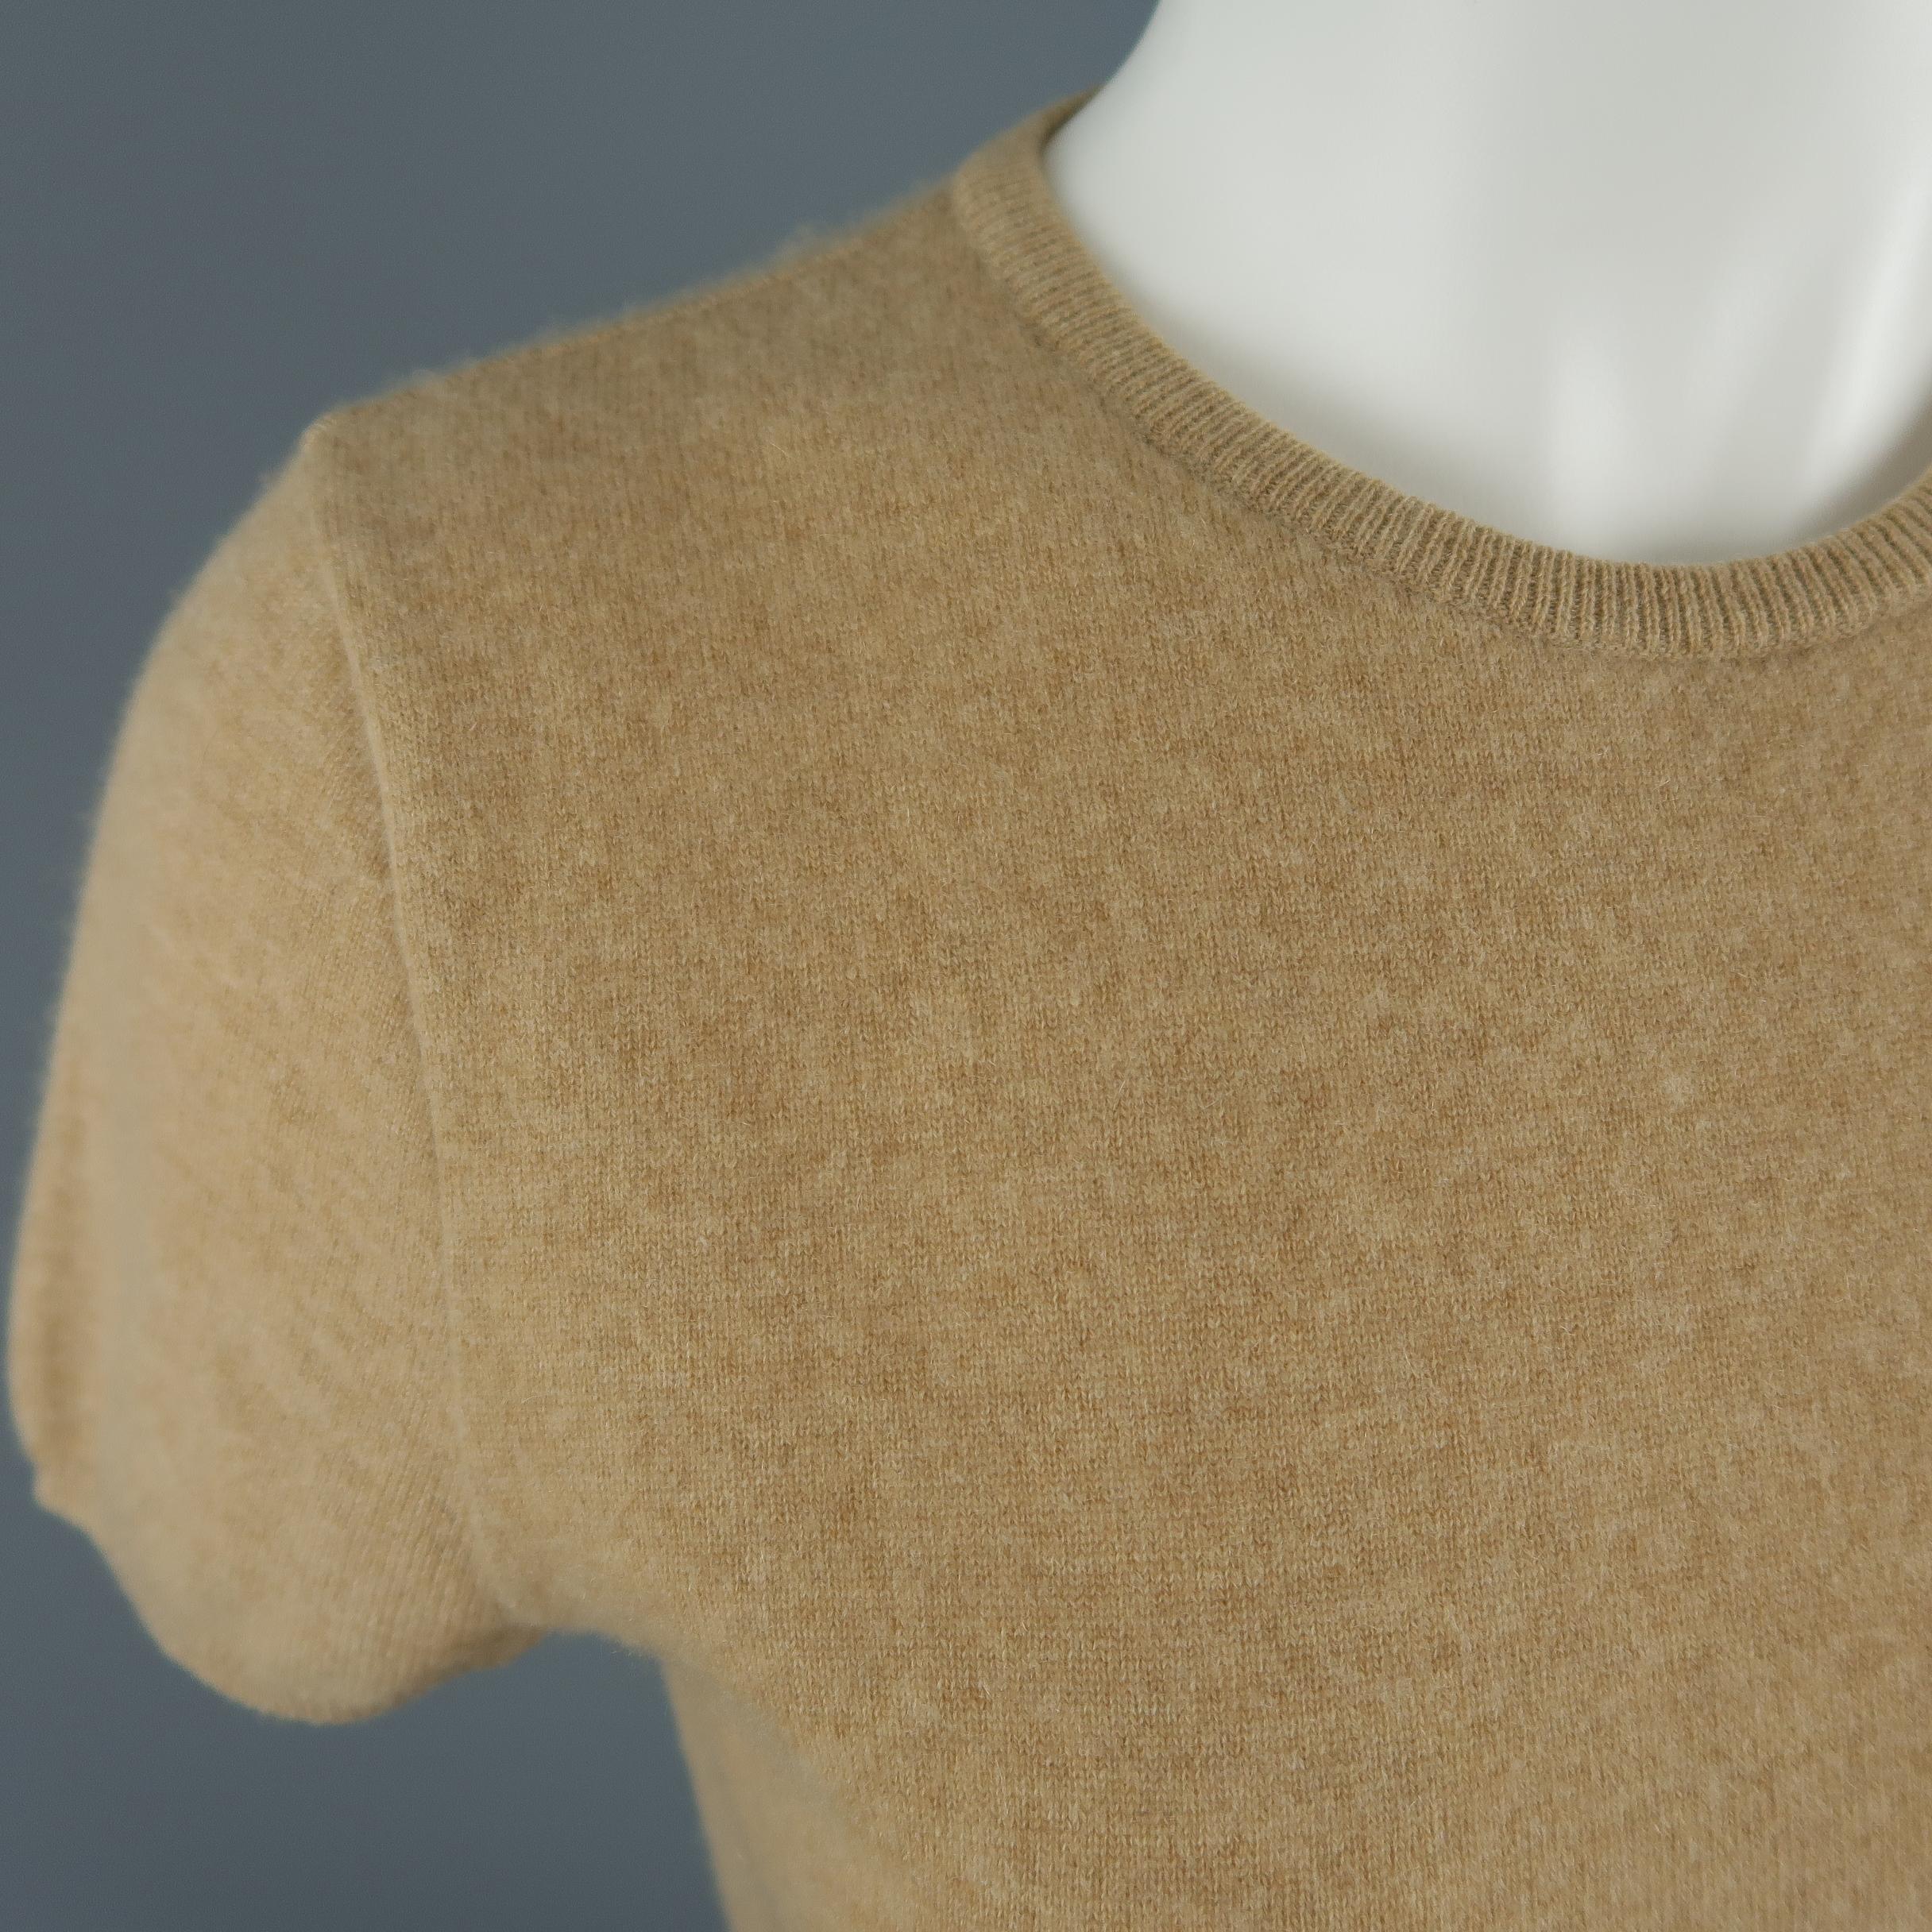 RALPH LAUREN COLLECTION pullover comes in camel cashmere knit with a crewneck and short sleeves. Made in Italy.
 
Excellent Pre-Owned Condition.
Marked: M
 
Measurements:
 
Shoulder: 14 in.
Bust: 34 in.
Sleeve: 6.5 in.
Length: 21 in.